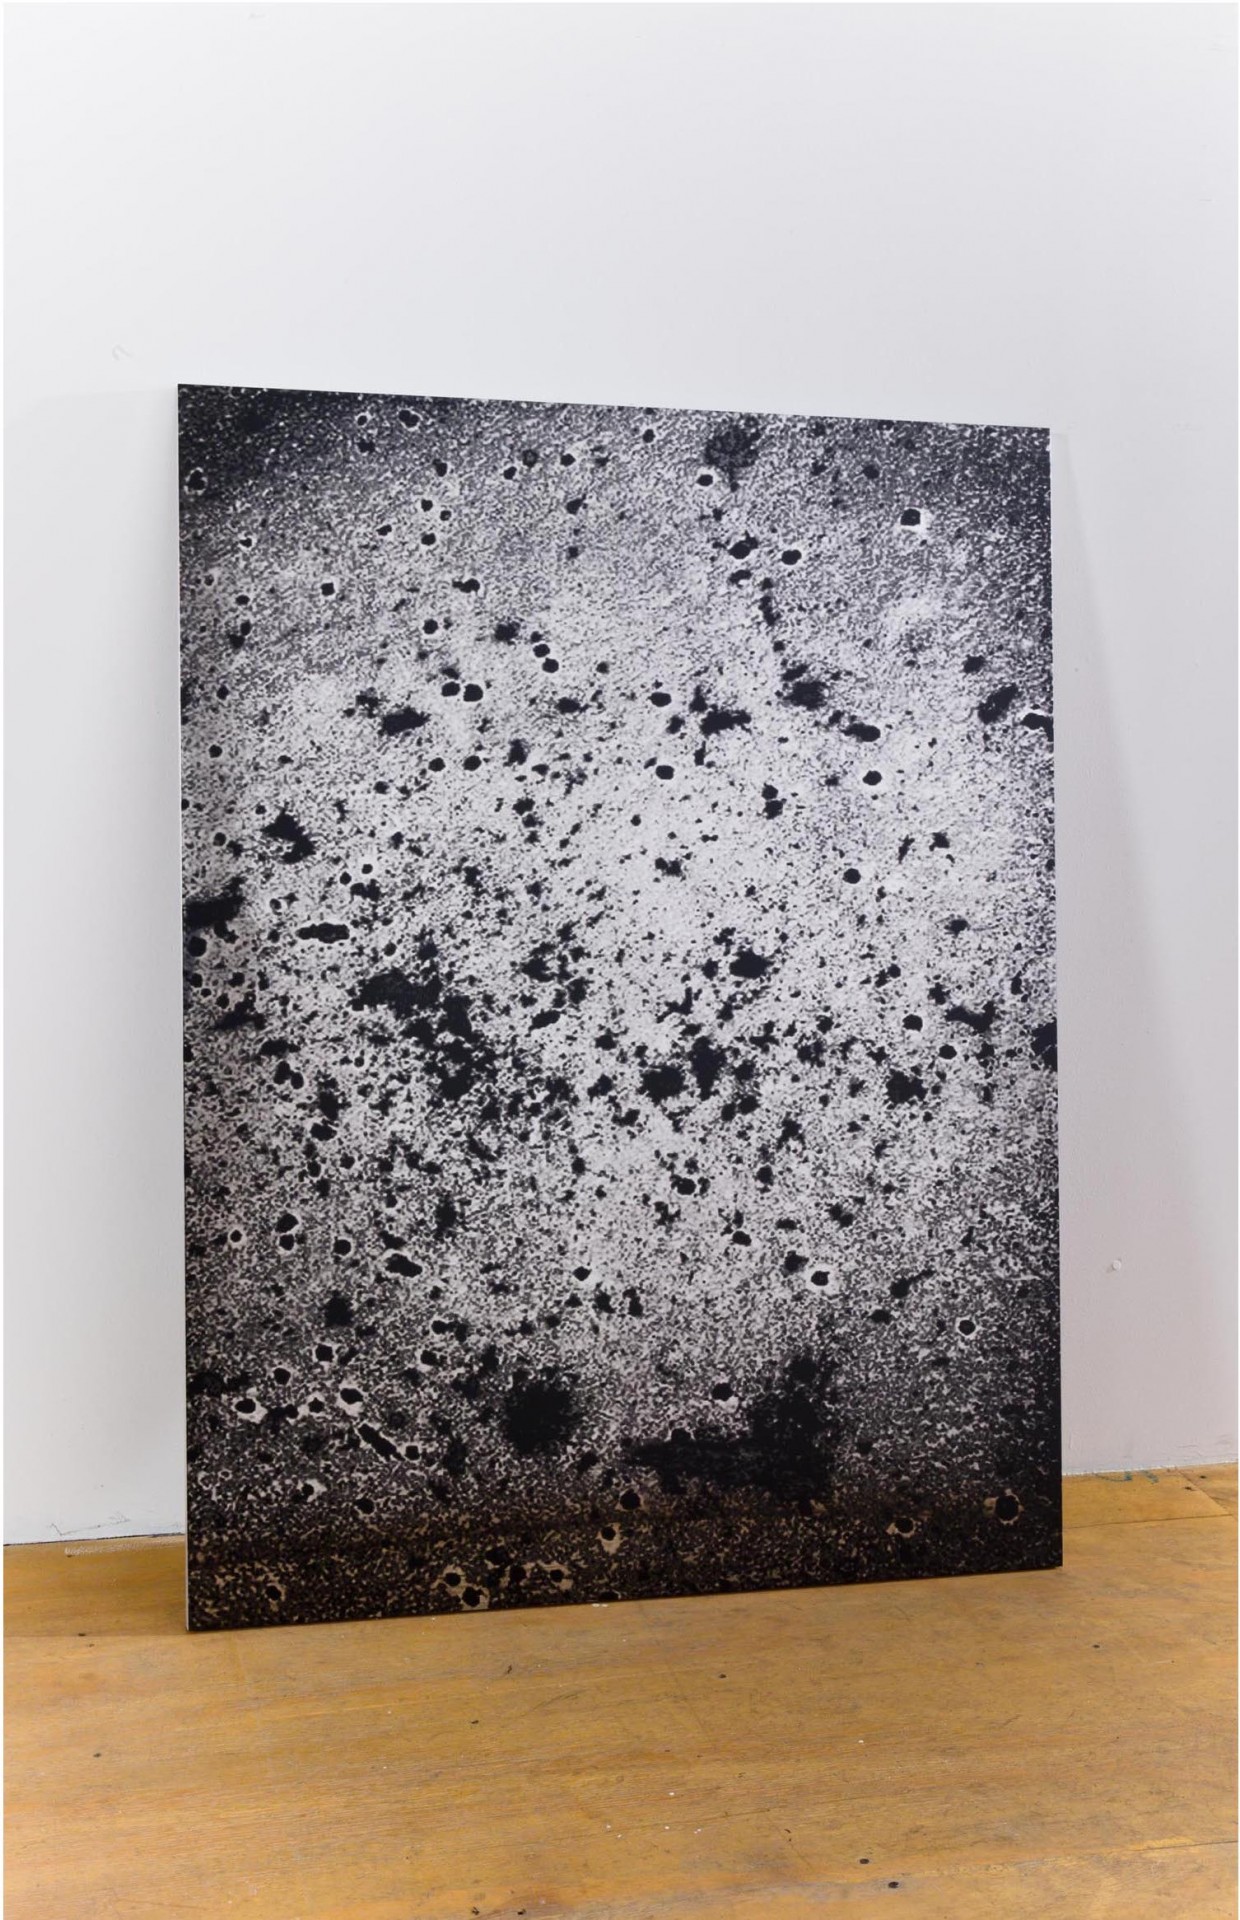 John Jurayj, *Untitled (Abstraction #7)*, 2011. Gunpowder and ink screened on polished stainless steel